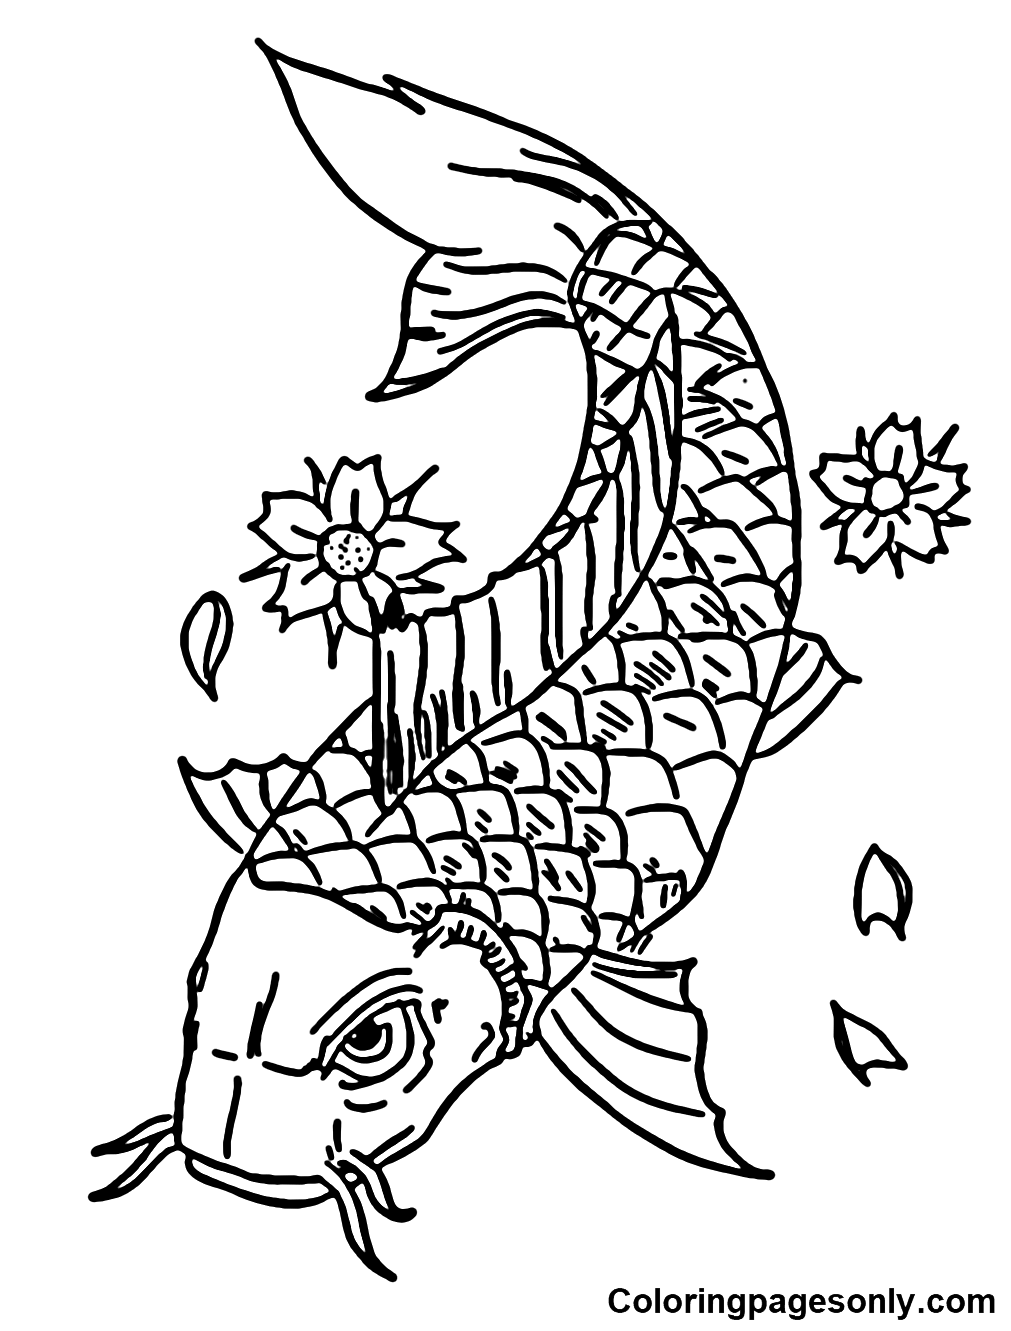 Koi fish coloring pages printable for free download